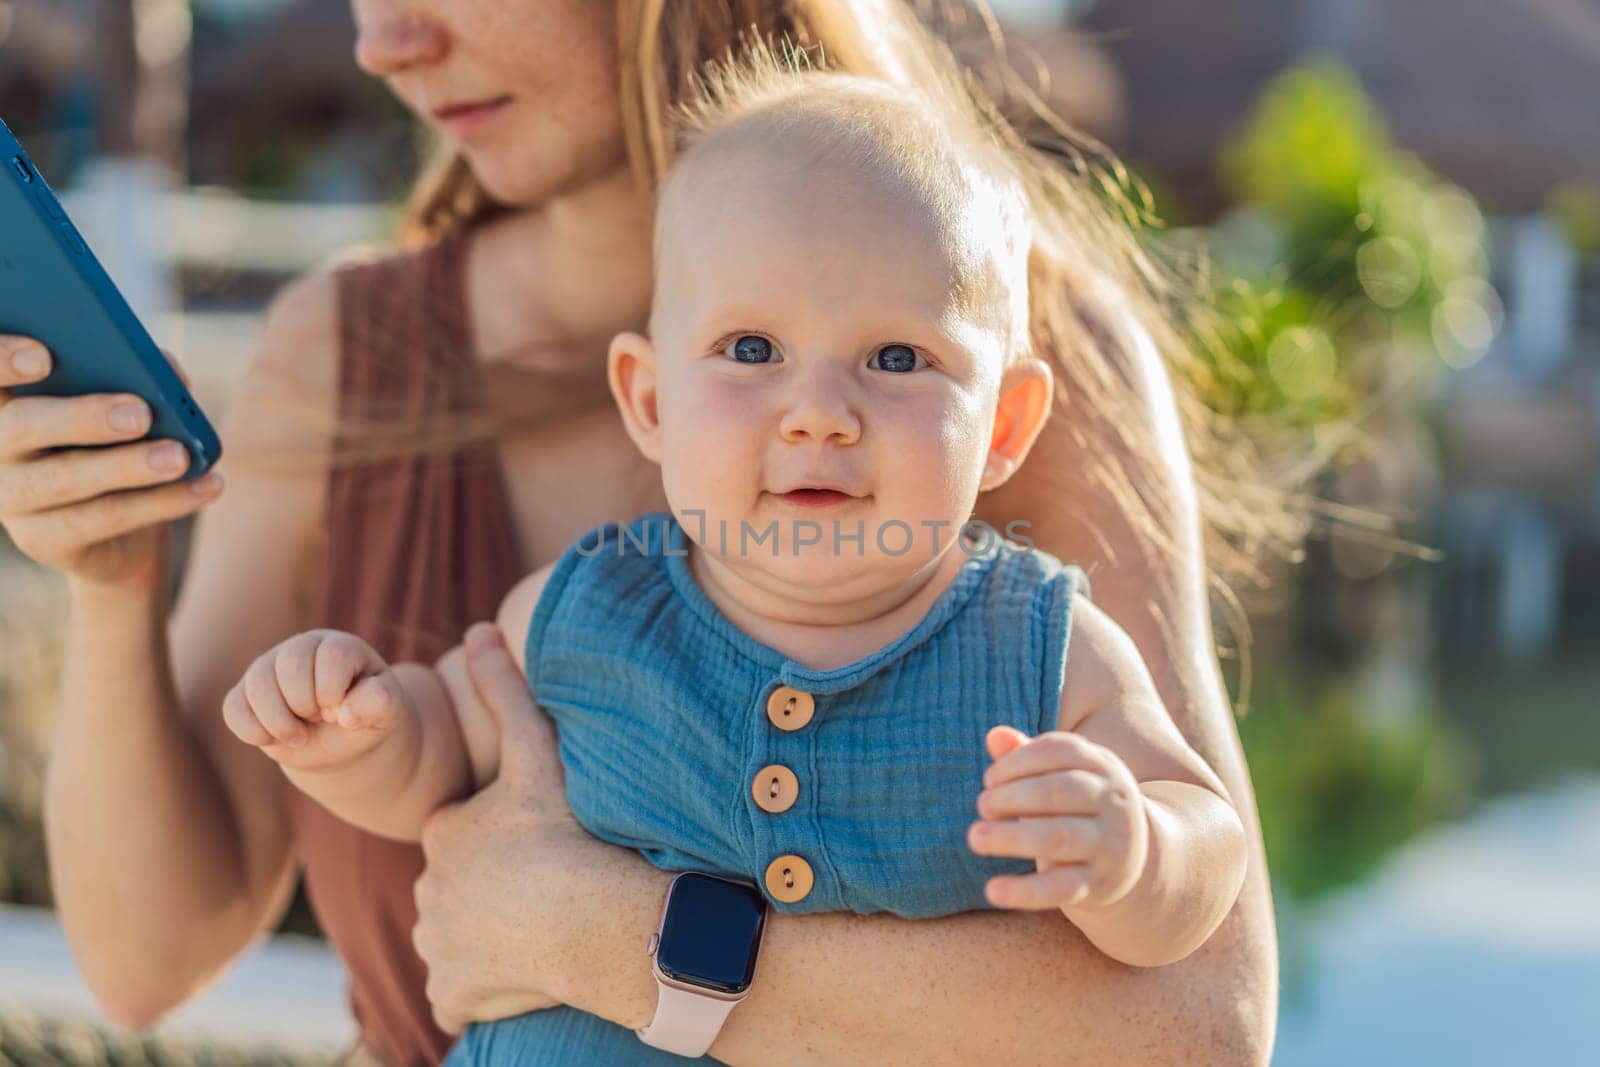 Mom holds her adorable baby while holding a smartphone.